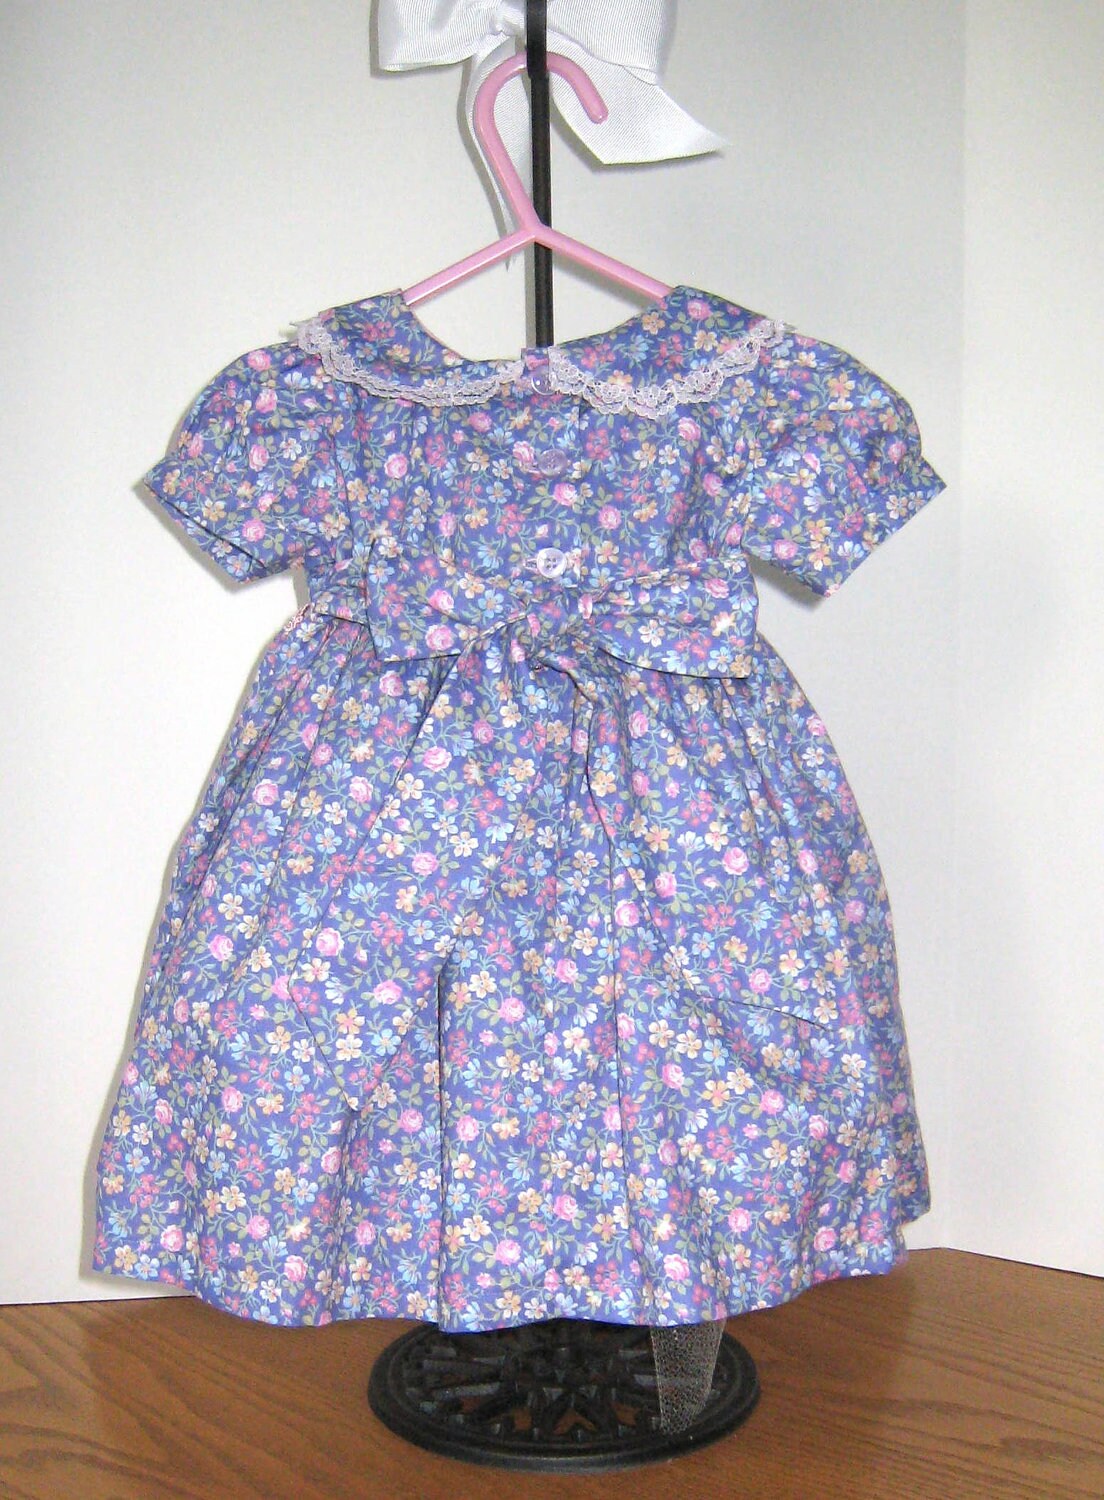 Old-Fashioned Lavender Print Baby Girl Dress and Bonnet